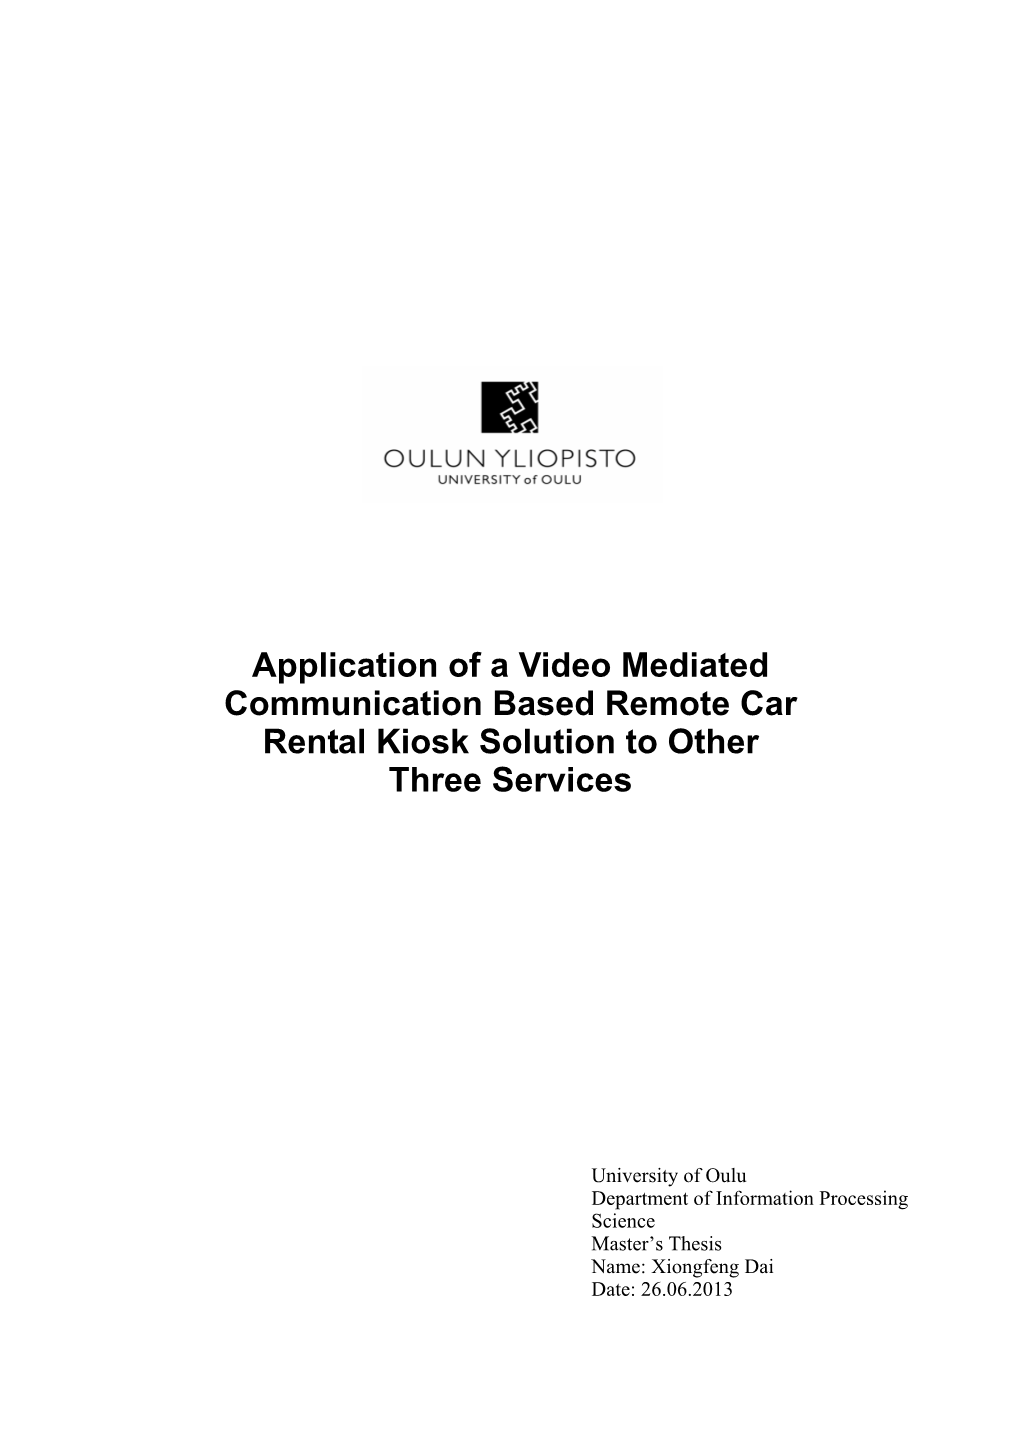 Application of a Video Mediated Communication Based Remote Car Rental Kiosk Solution to Other Three Services